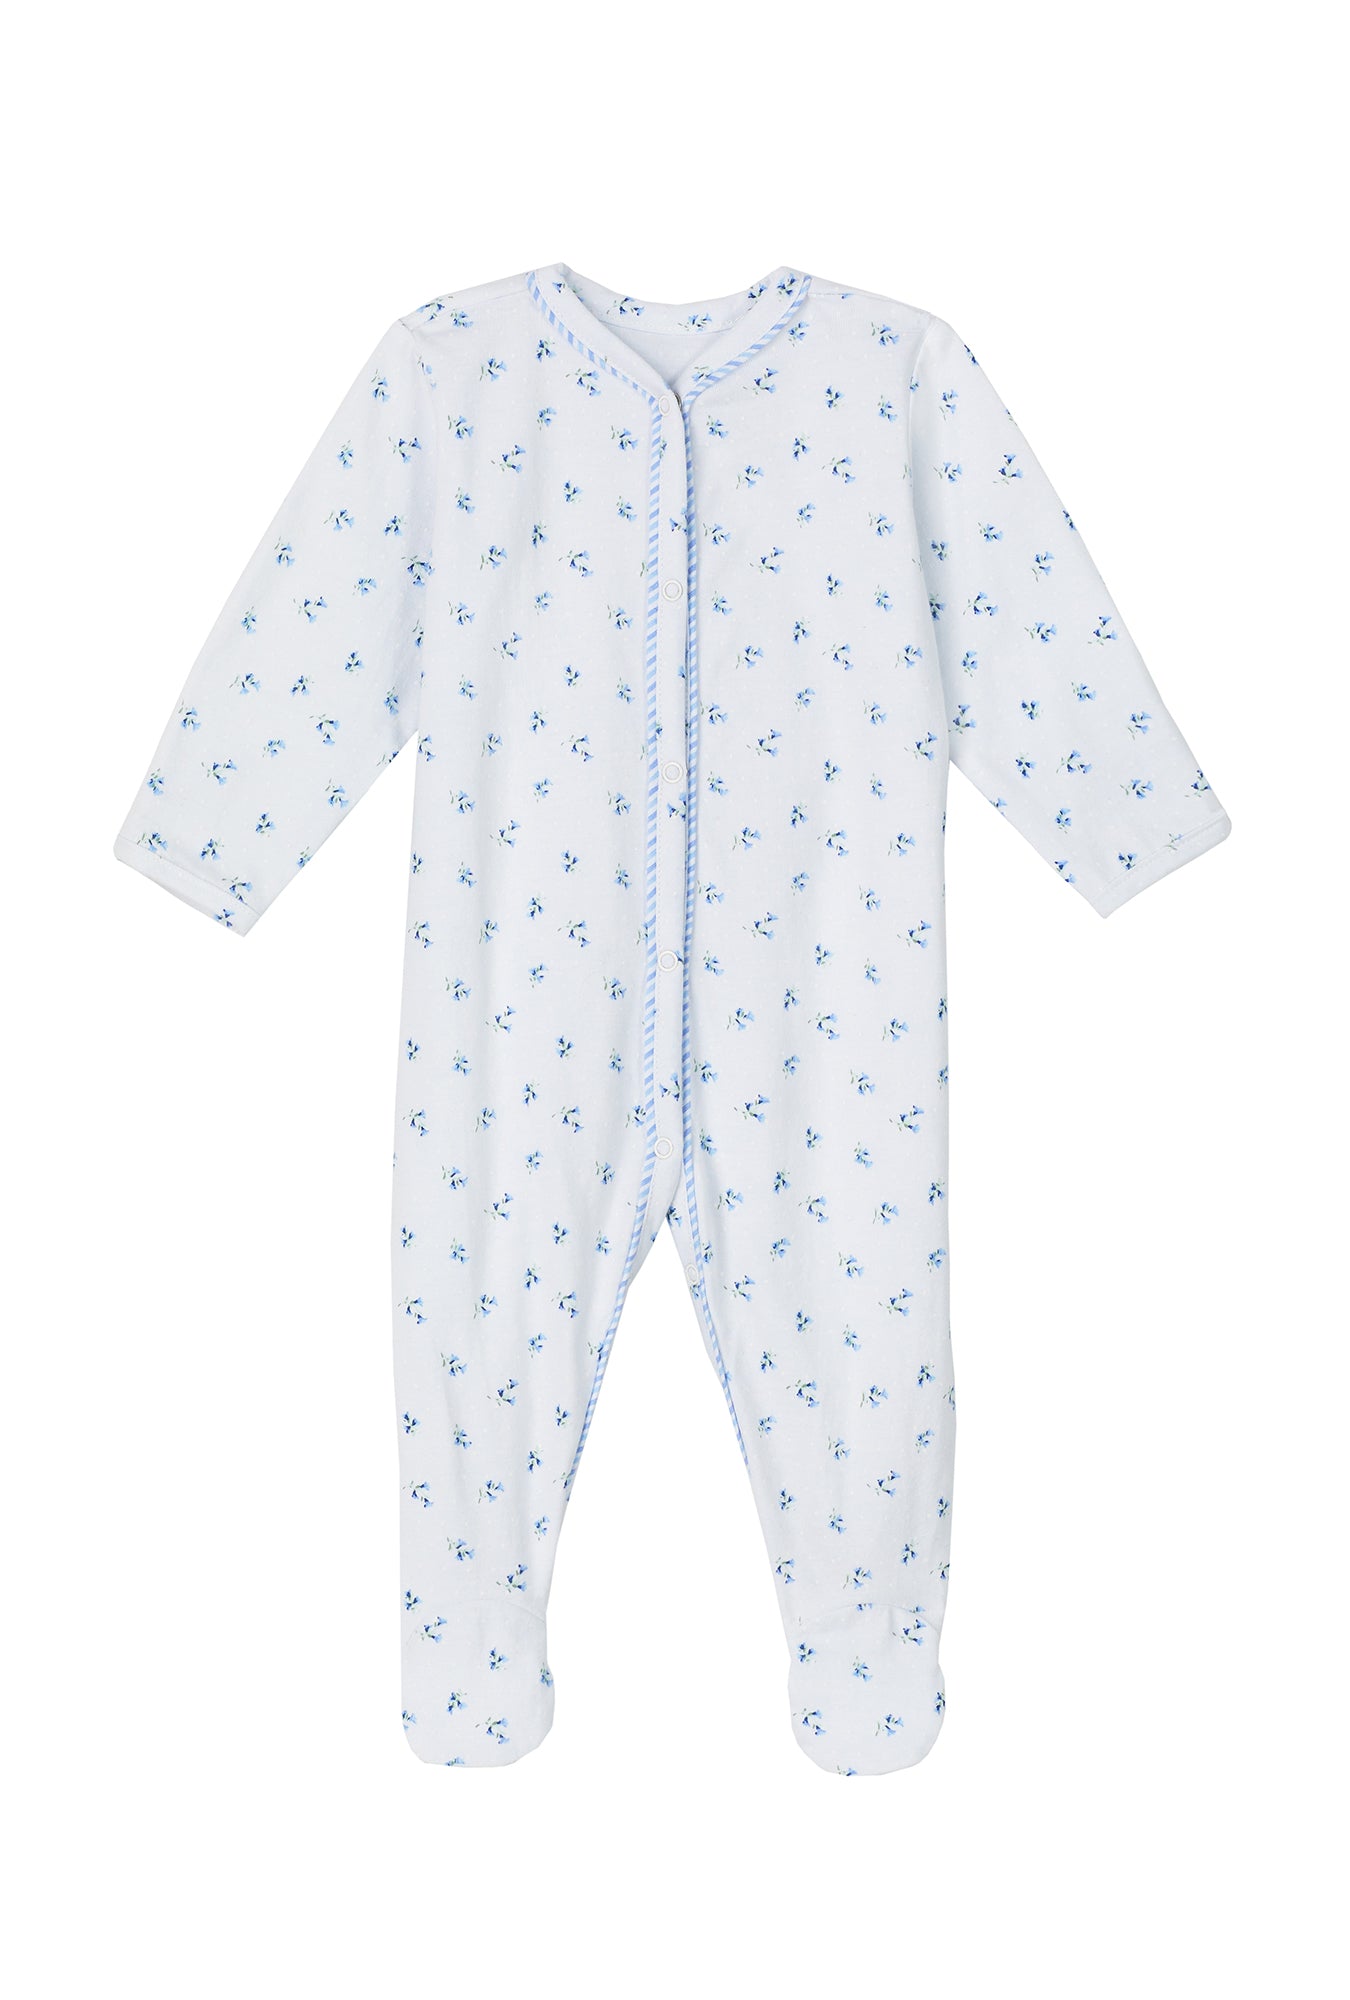 A Baby Seaside Floral Cotton Onesie